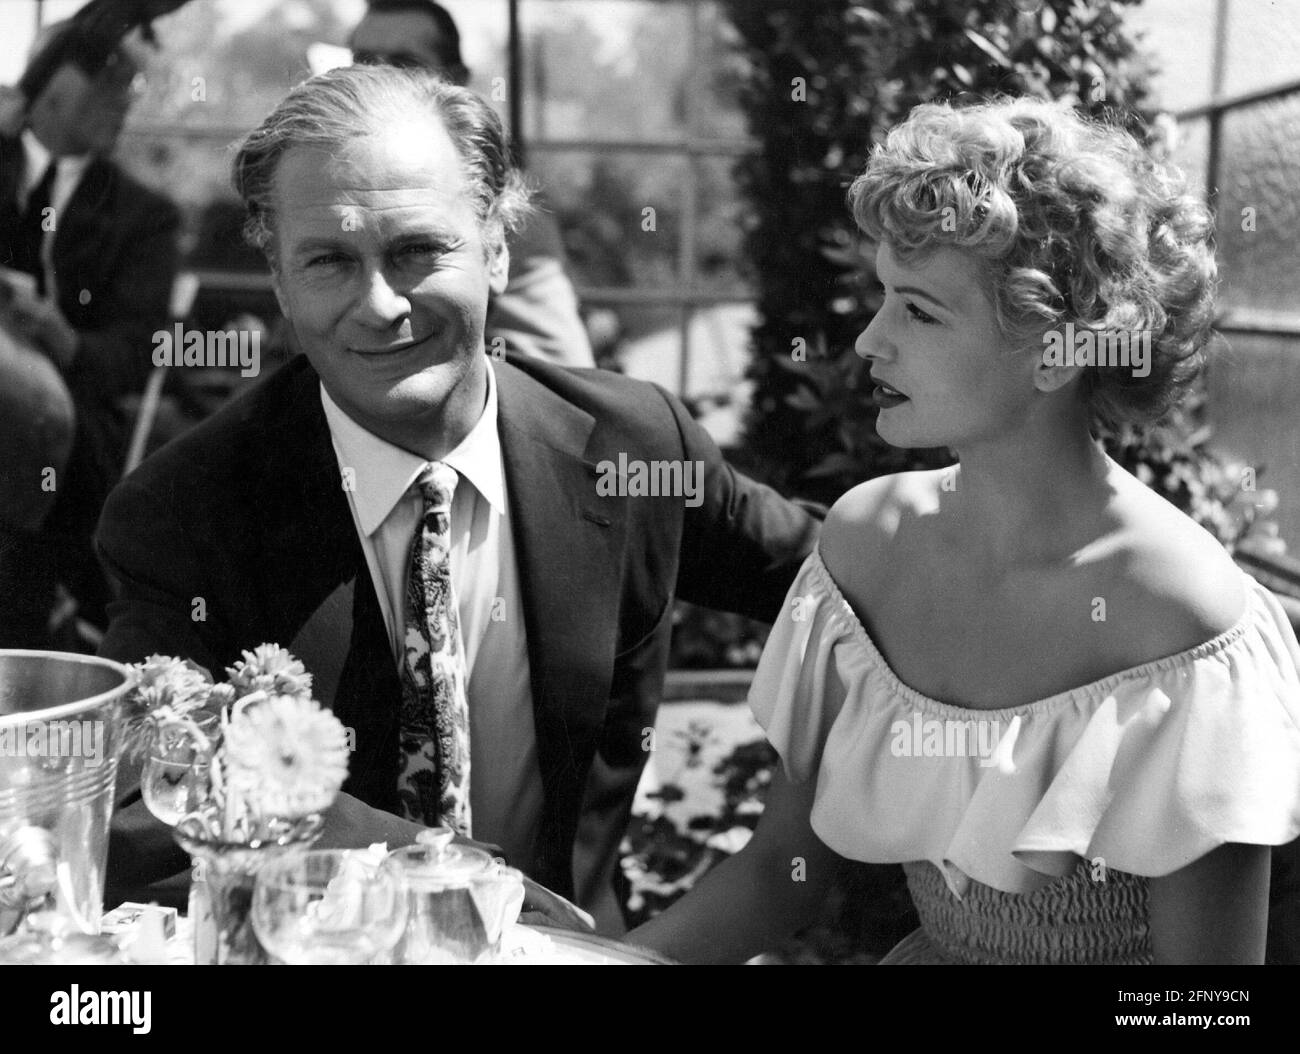 Juergens, Curd, 13.12.1915 - 18.6.1982, German actor, half length, with his wife Eva Bartok, 1950s, ADDITIONAL-RIGHTS-CLEARANCE-INFO-NOT-AVAILABLE Stock Photo